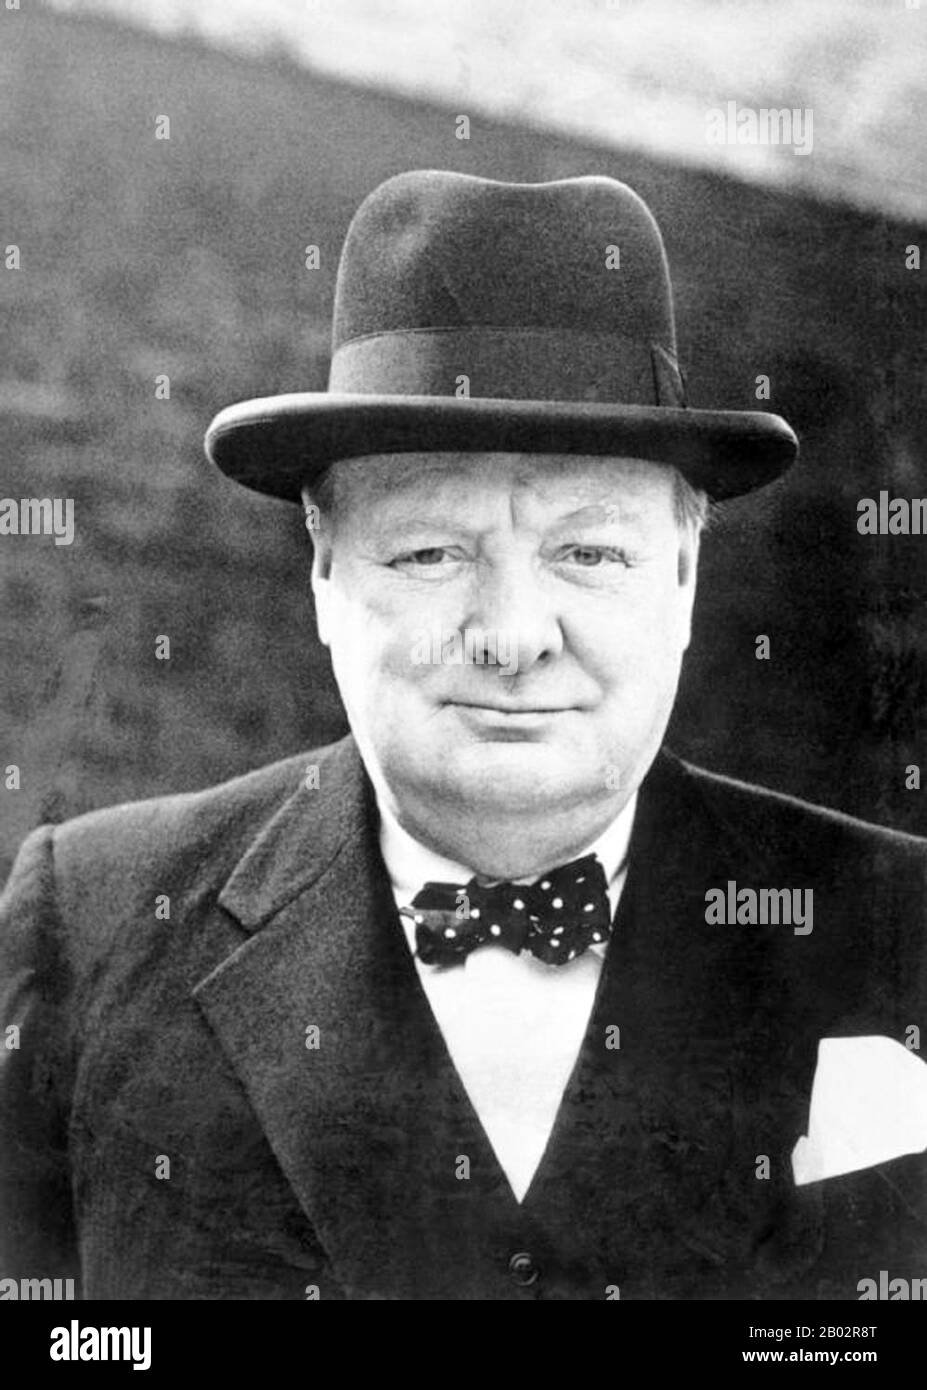 Sir Winston Leonard Spencer-Churchill, KG, OM, CH, TD, DL, FRS, RA (30 November 1874 – 24 January 1965) was a British politician who was the Prime Minister of the United Kingdom from 1940 to 1945 and again from 1951 to 1955.  Widely regarded as one of the greatest wartime leaders of the 20th century, Churchill was also an officer in the British Army, a historian, a writer (as Winston S. Churchill), and an artist. He won the Nobel Prize in Literature, and was the first person to be made an honorary citizen of the United States. Stock Photo